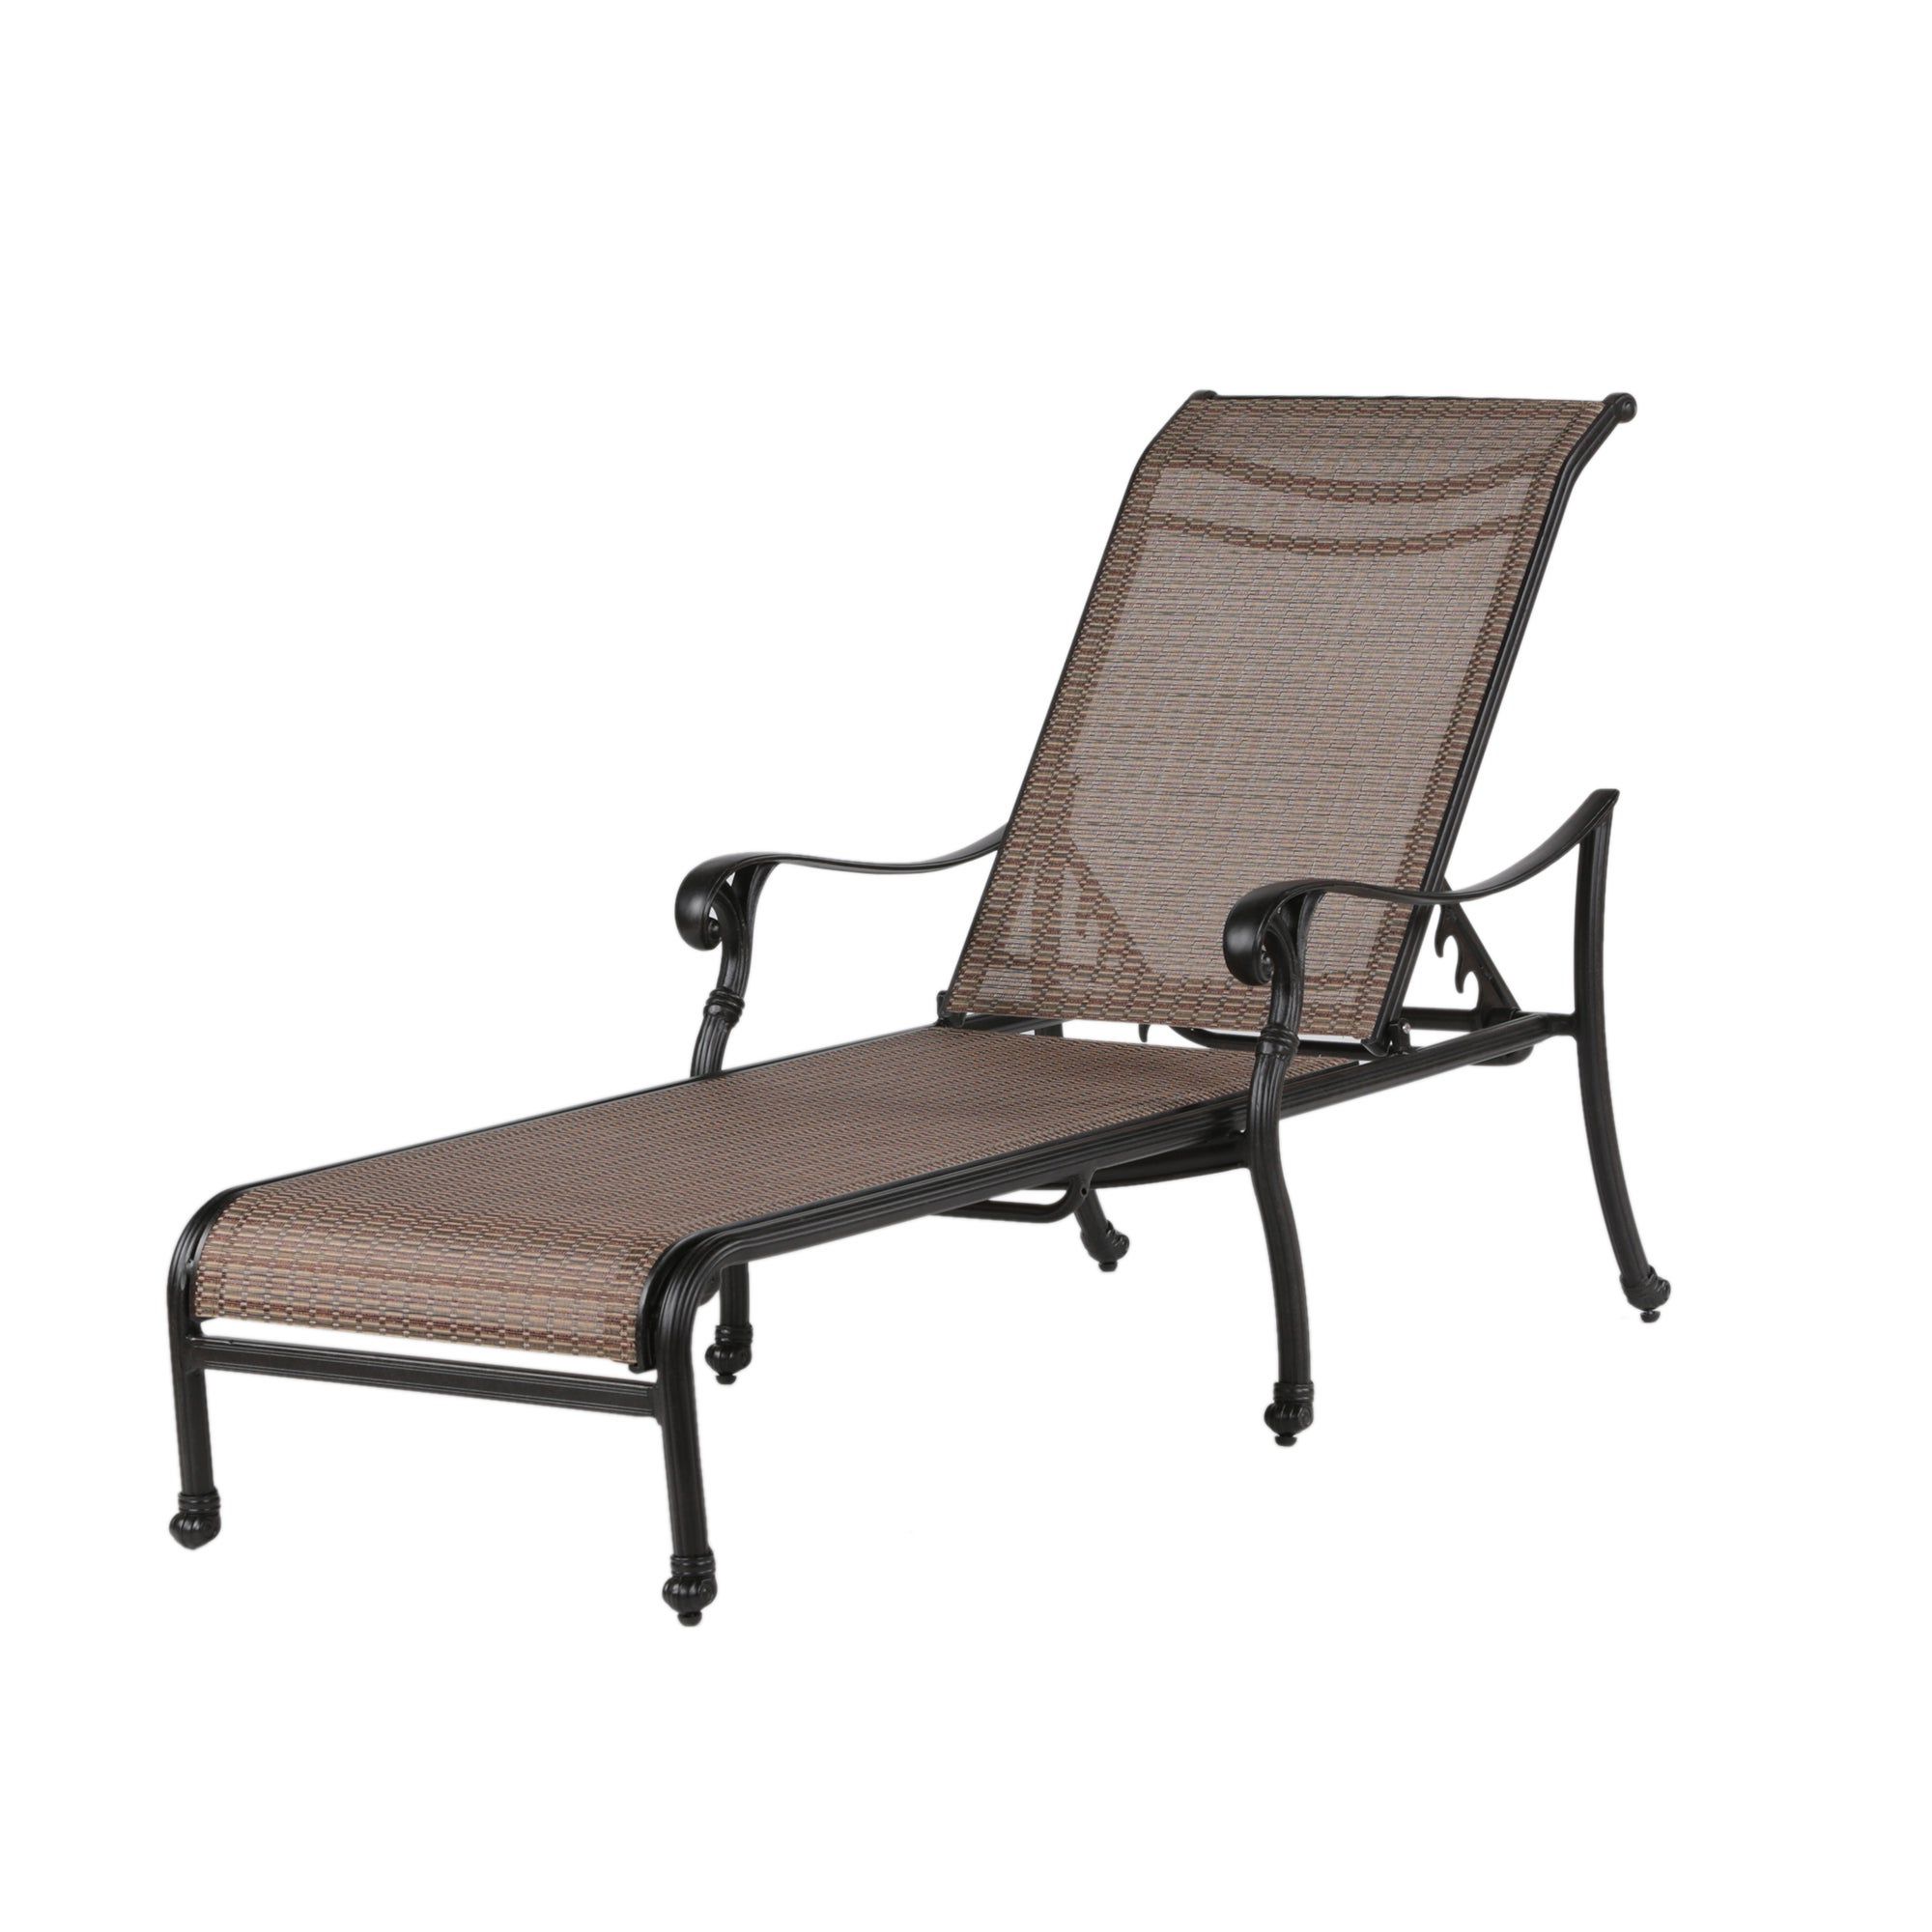 Havenside Home Fenwick Chaise Lounge Chairs With Preferred Havenside Home Manasquan Cast Aluminum Reclining Sling Chaise Lounger (View 11 of 25)